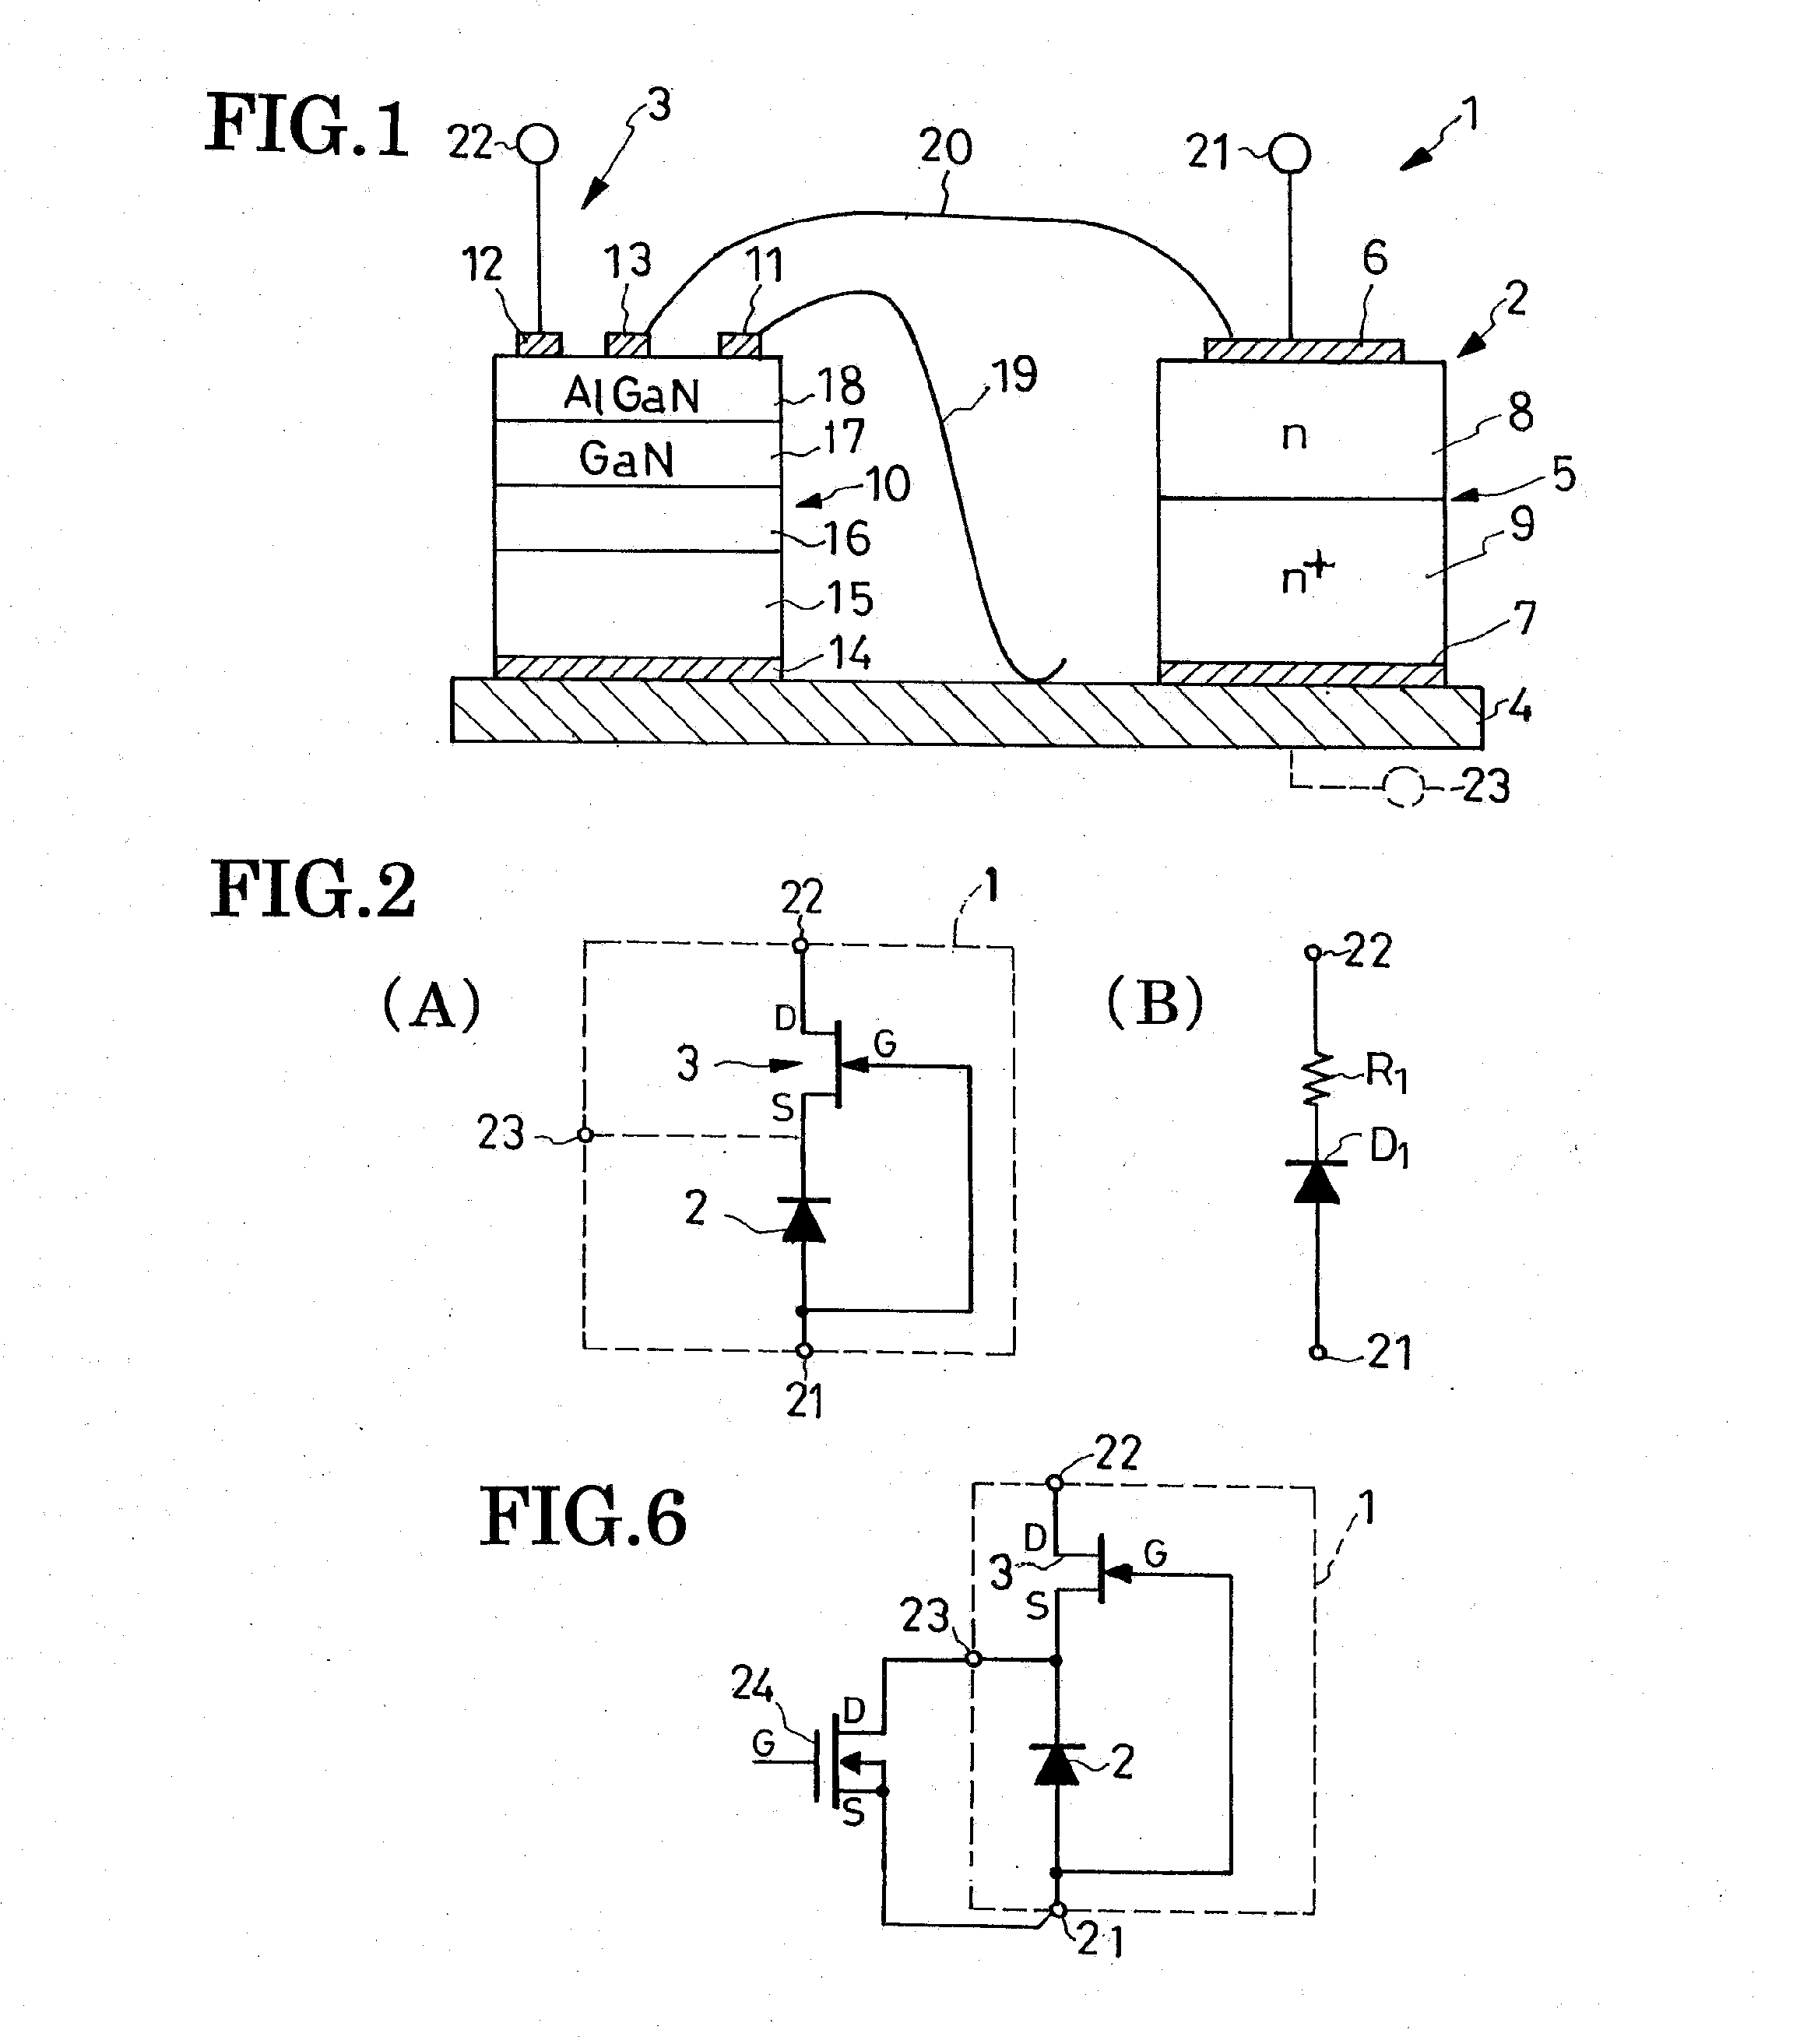 Diode-Like Composite Semiconductor Device